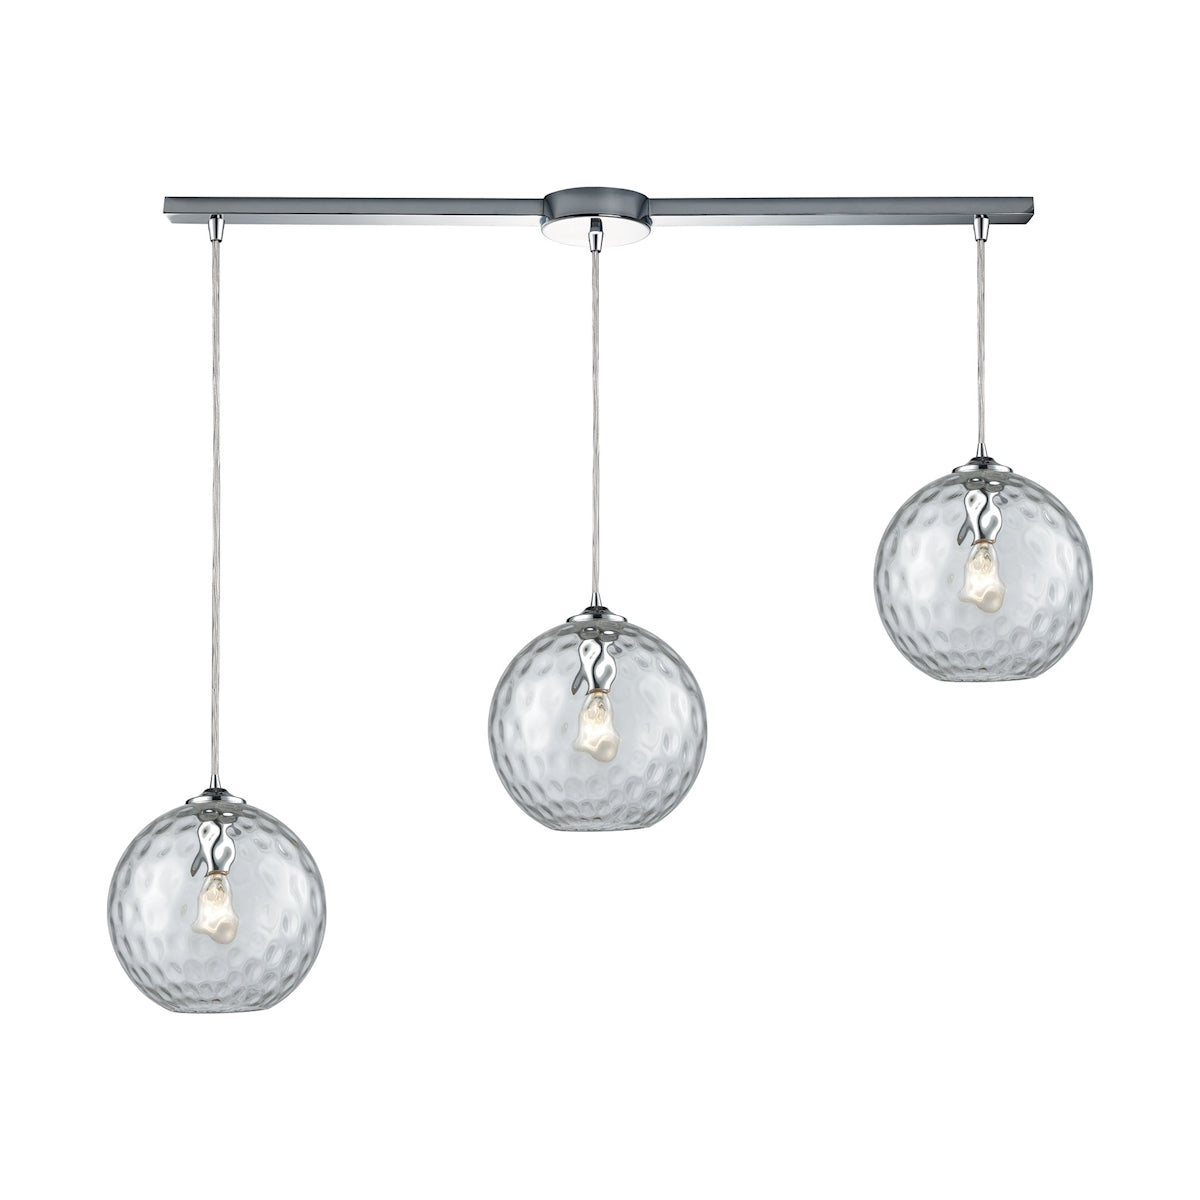 ELK Lighting 31380/3L-CLR Watersphere 3-Light Linear Mini Pendant Fixture in Chrome with Hammered Clear Glass